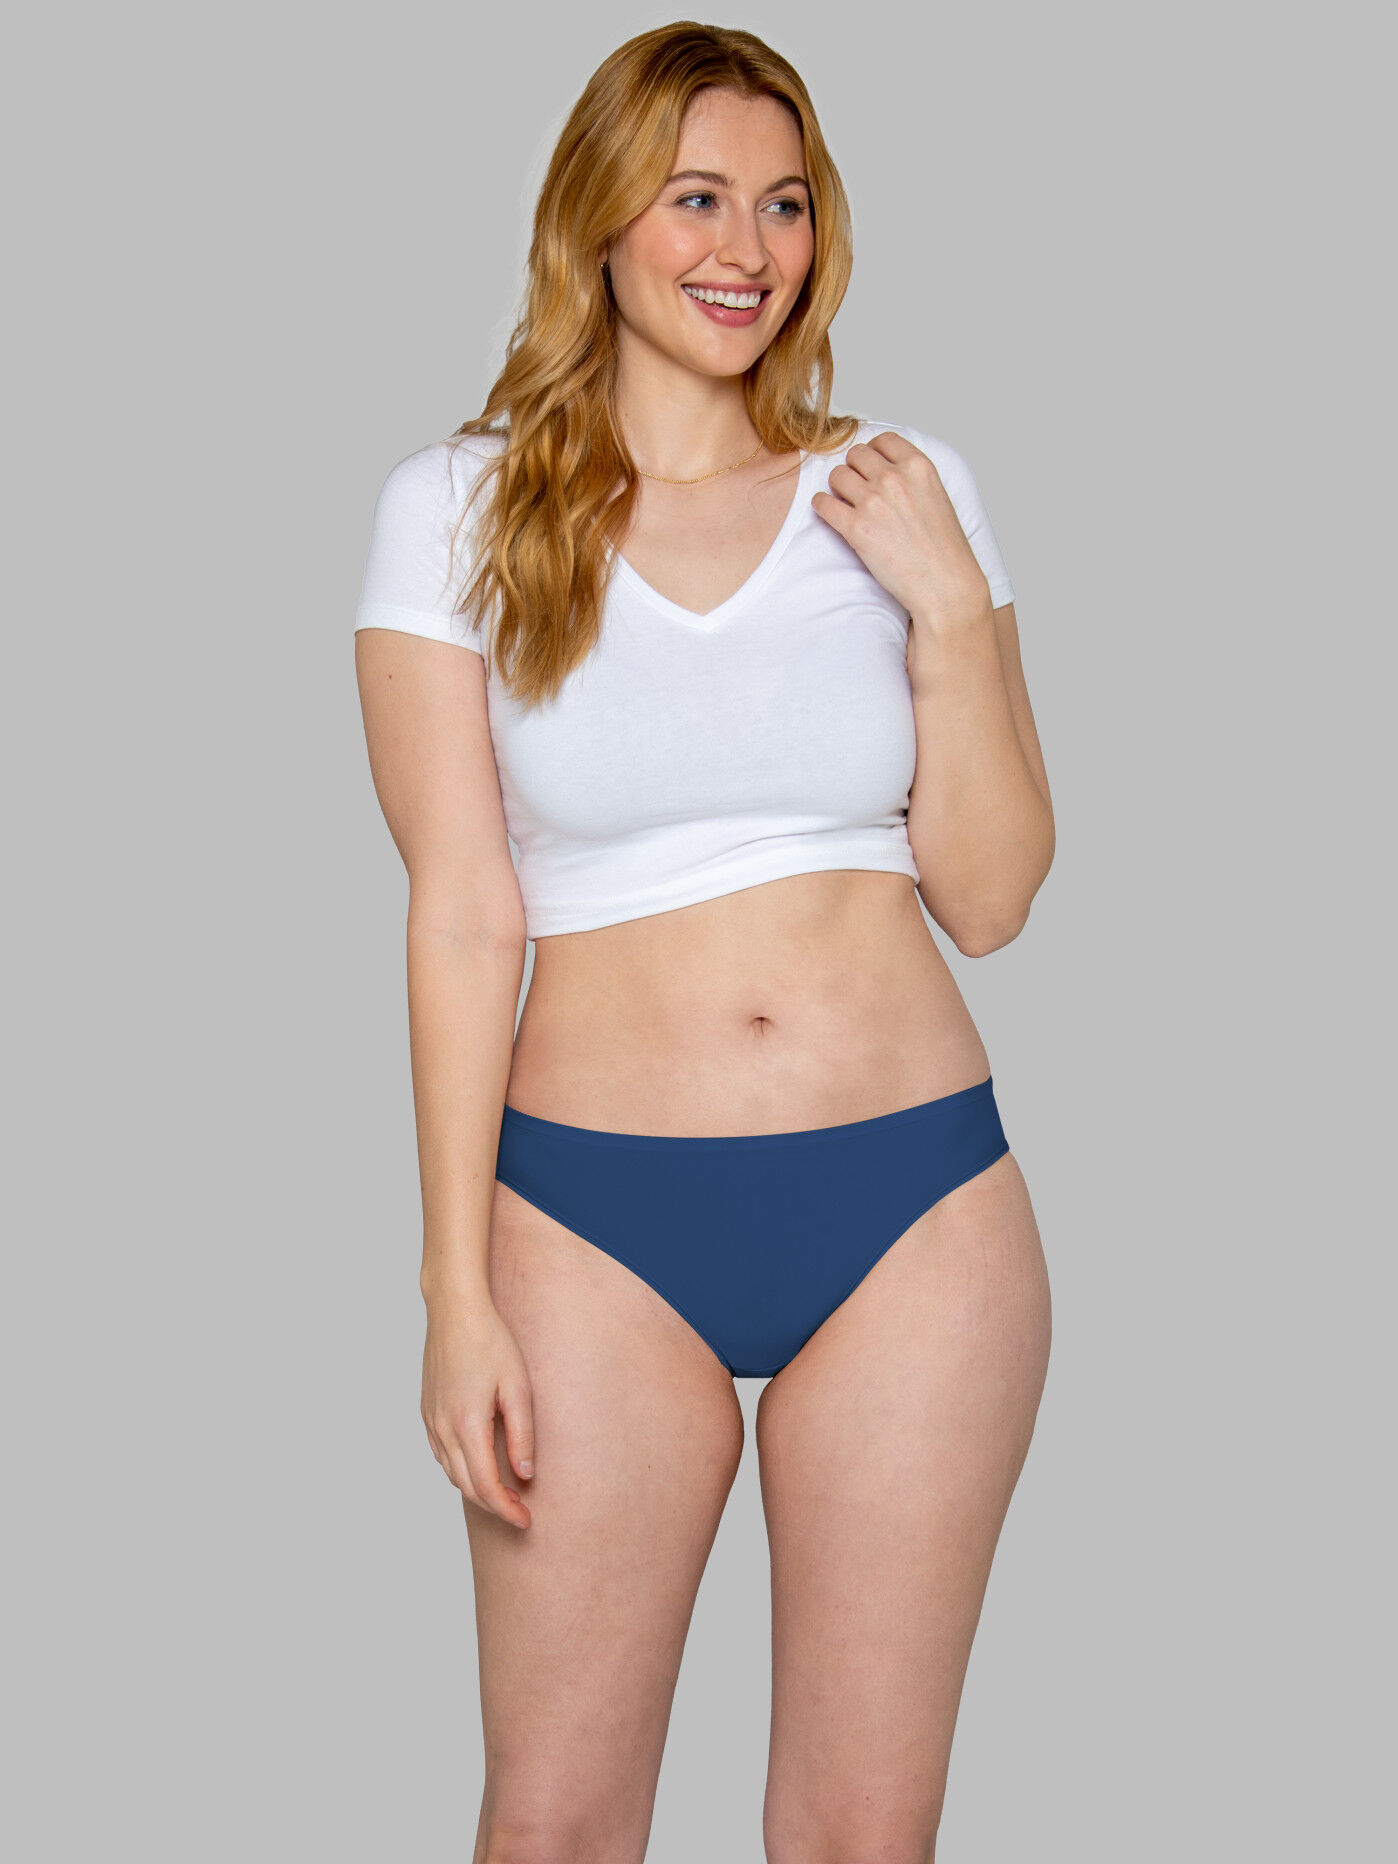 Comfortable underwear and stylish apparel for the whole family 